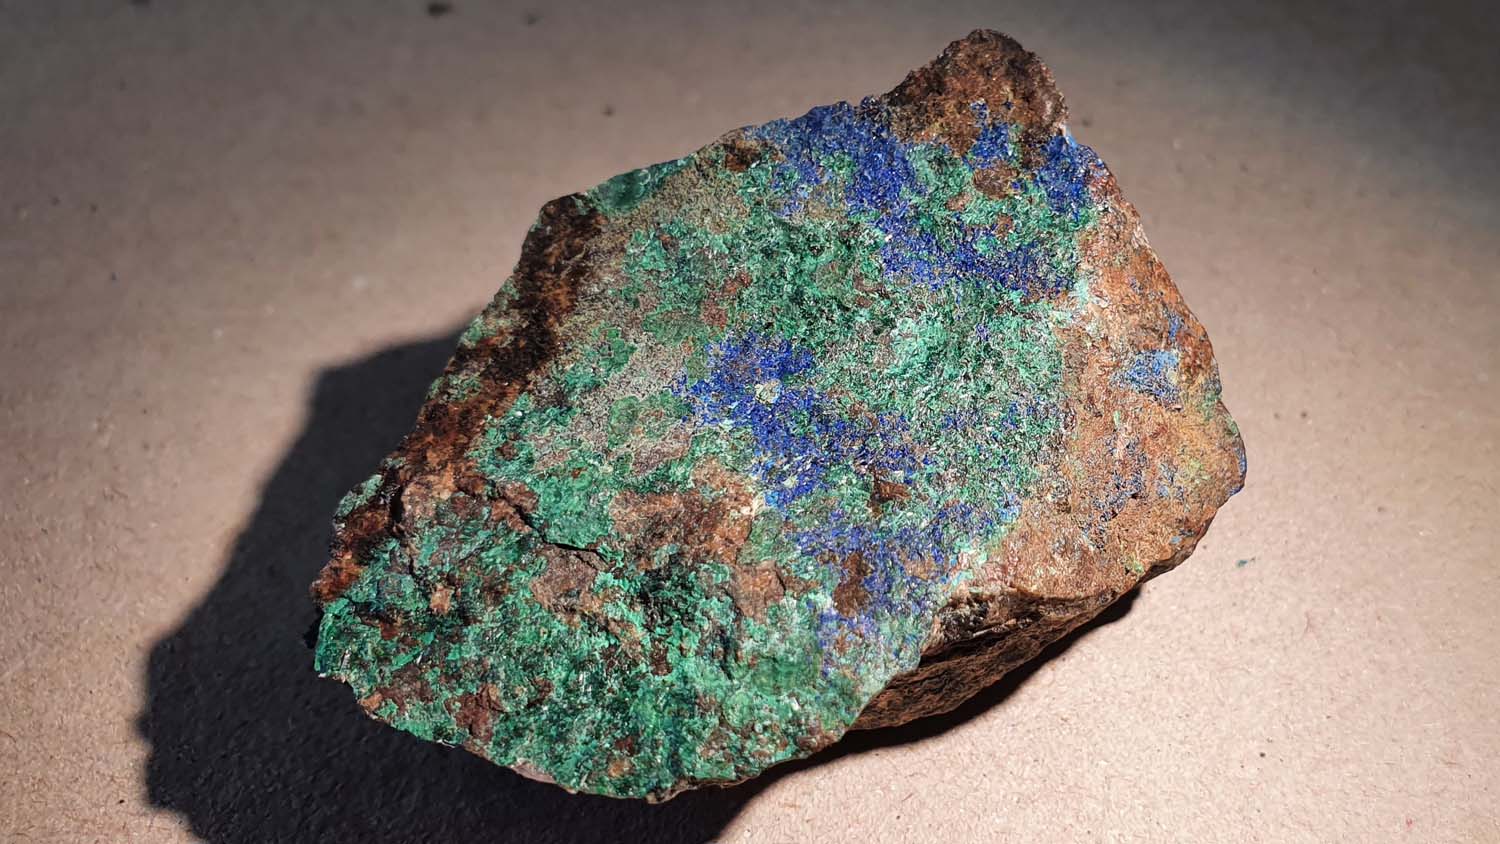 A small specimen of colourful green and blue minerals from Charnwood Forest. (c) OUMNH